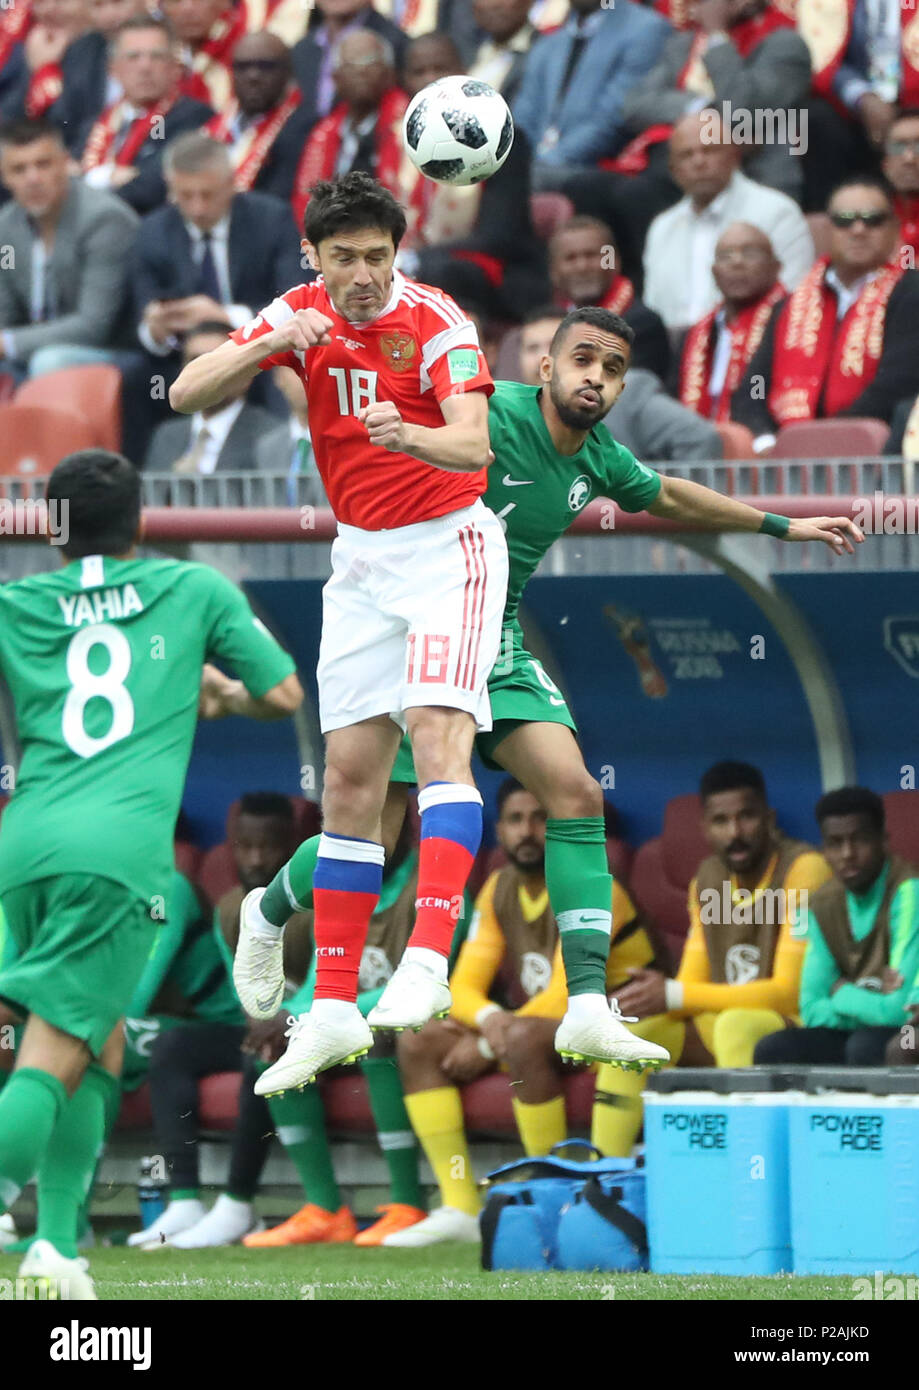 Moscow, Russia. 14th June, 2018. Russia's Yury Zhirkov (top) vies with Saudi Arabia's Mohammed Alburayk during the opening match of the 2018 FIFA World Cup in Moscow, Russia, on June 14, 2018. Credit: Xu Zijian/Xinhua/Alamy Live News Stock Photo